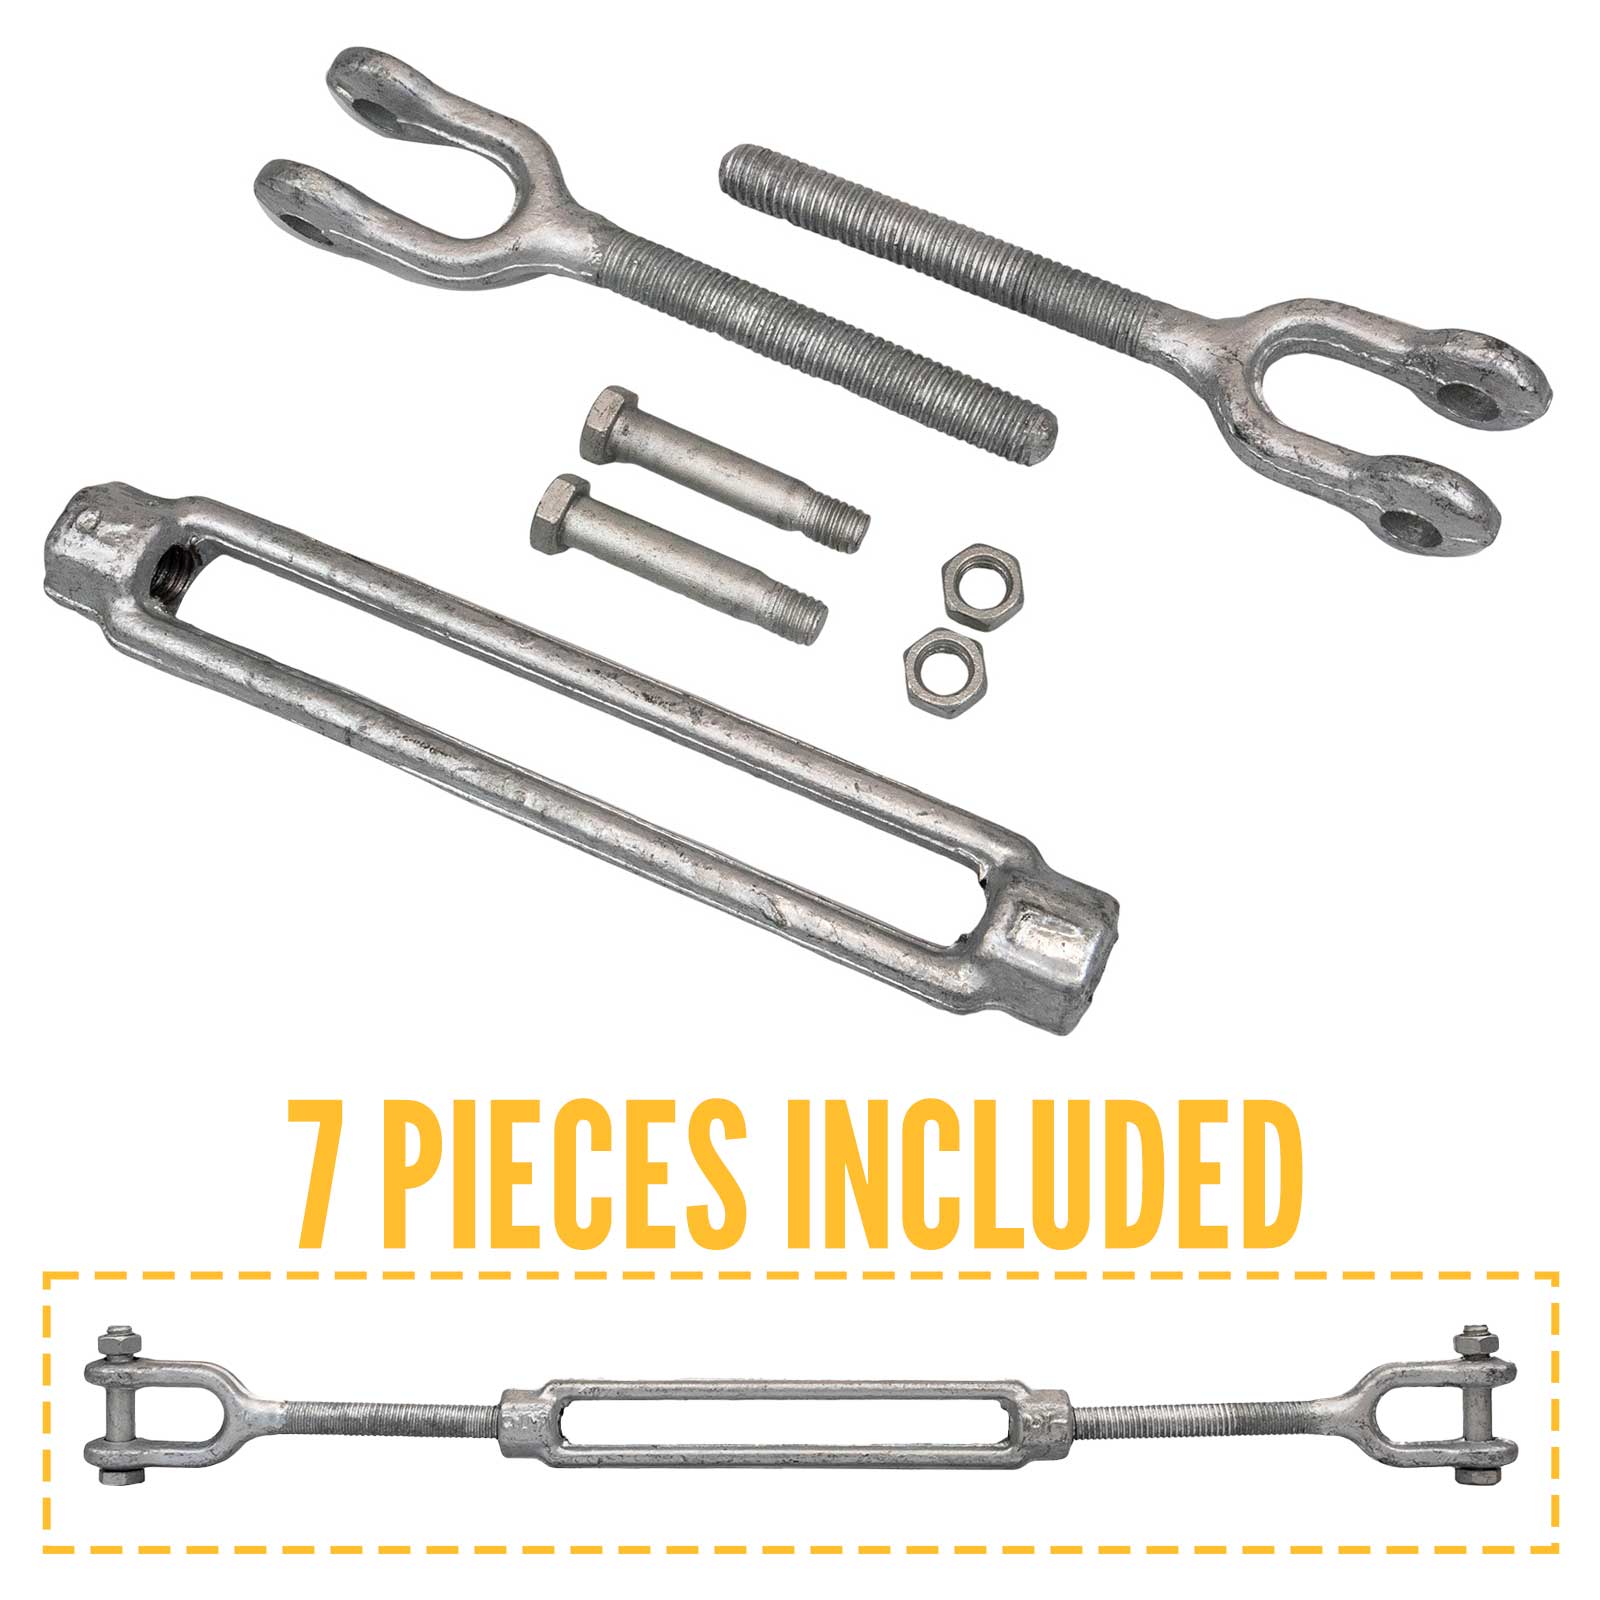 Turnbuckle included components